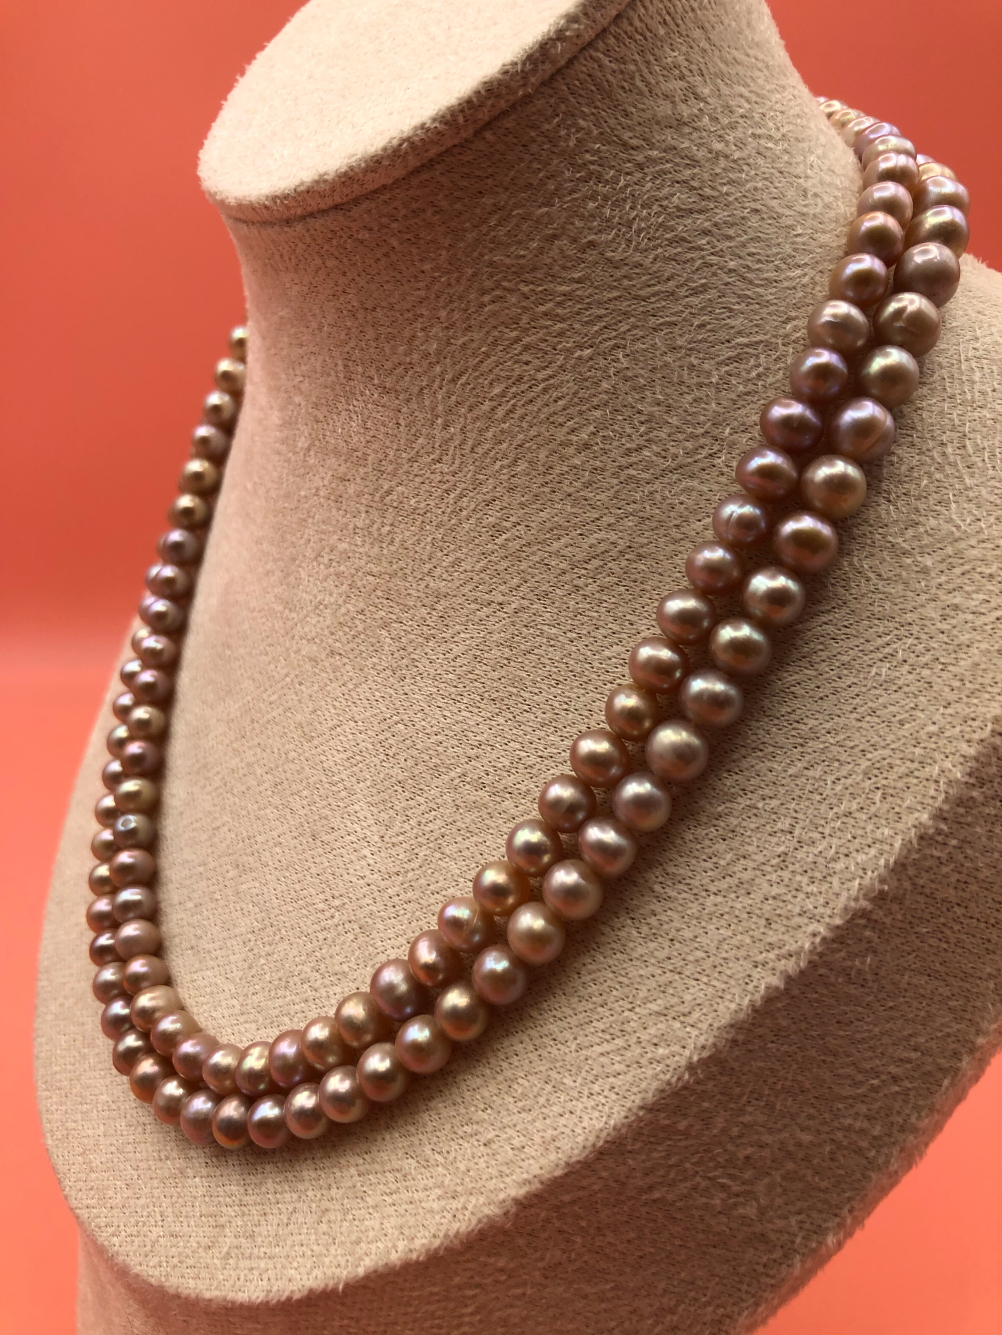 TWO STRINGS OF CULTURED PEARLS. A PINK 82cm ROPE WITH A 9ct HALLMARKED GOLD CLASP, AND A FURTHER - Image 3 of 6